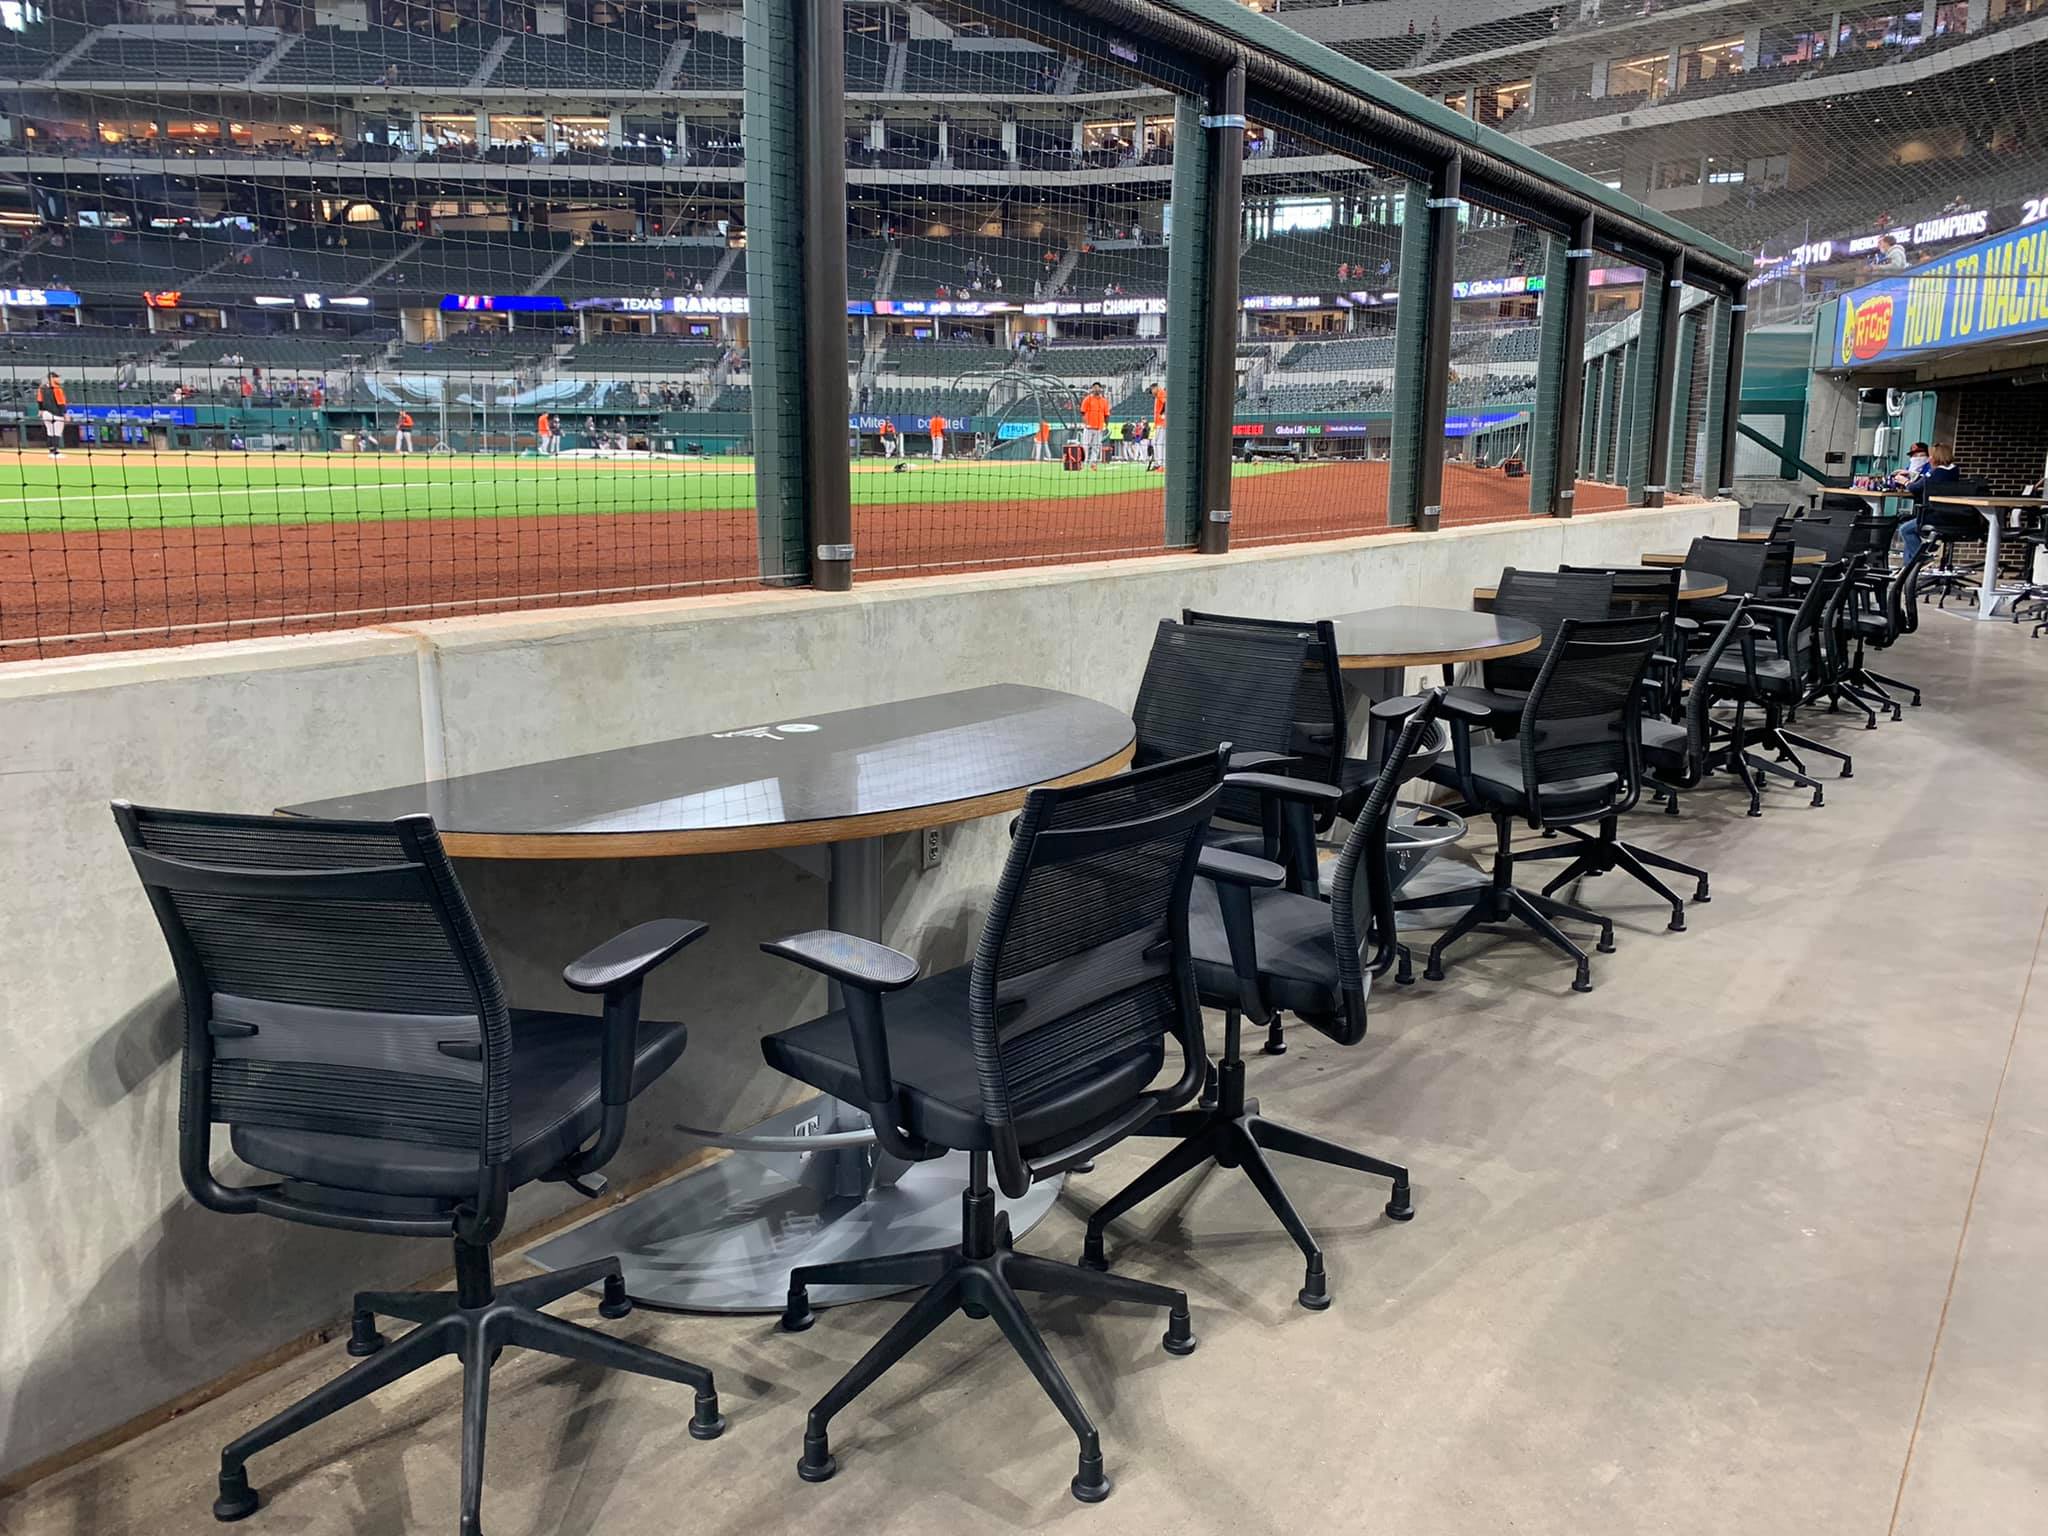 Globe Life Field Seating Chart + Rows, Seats and Club Seats